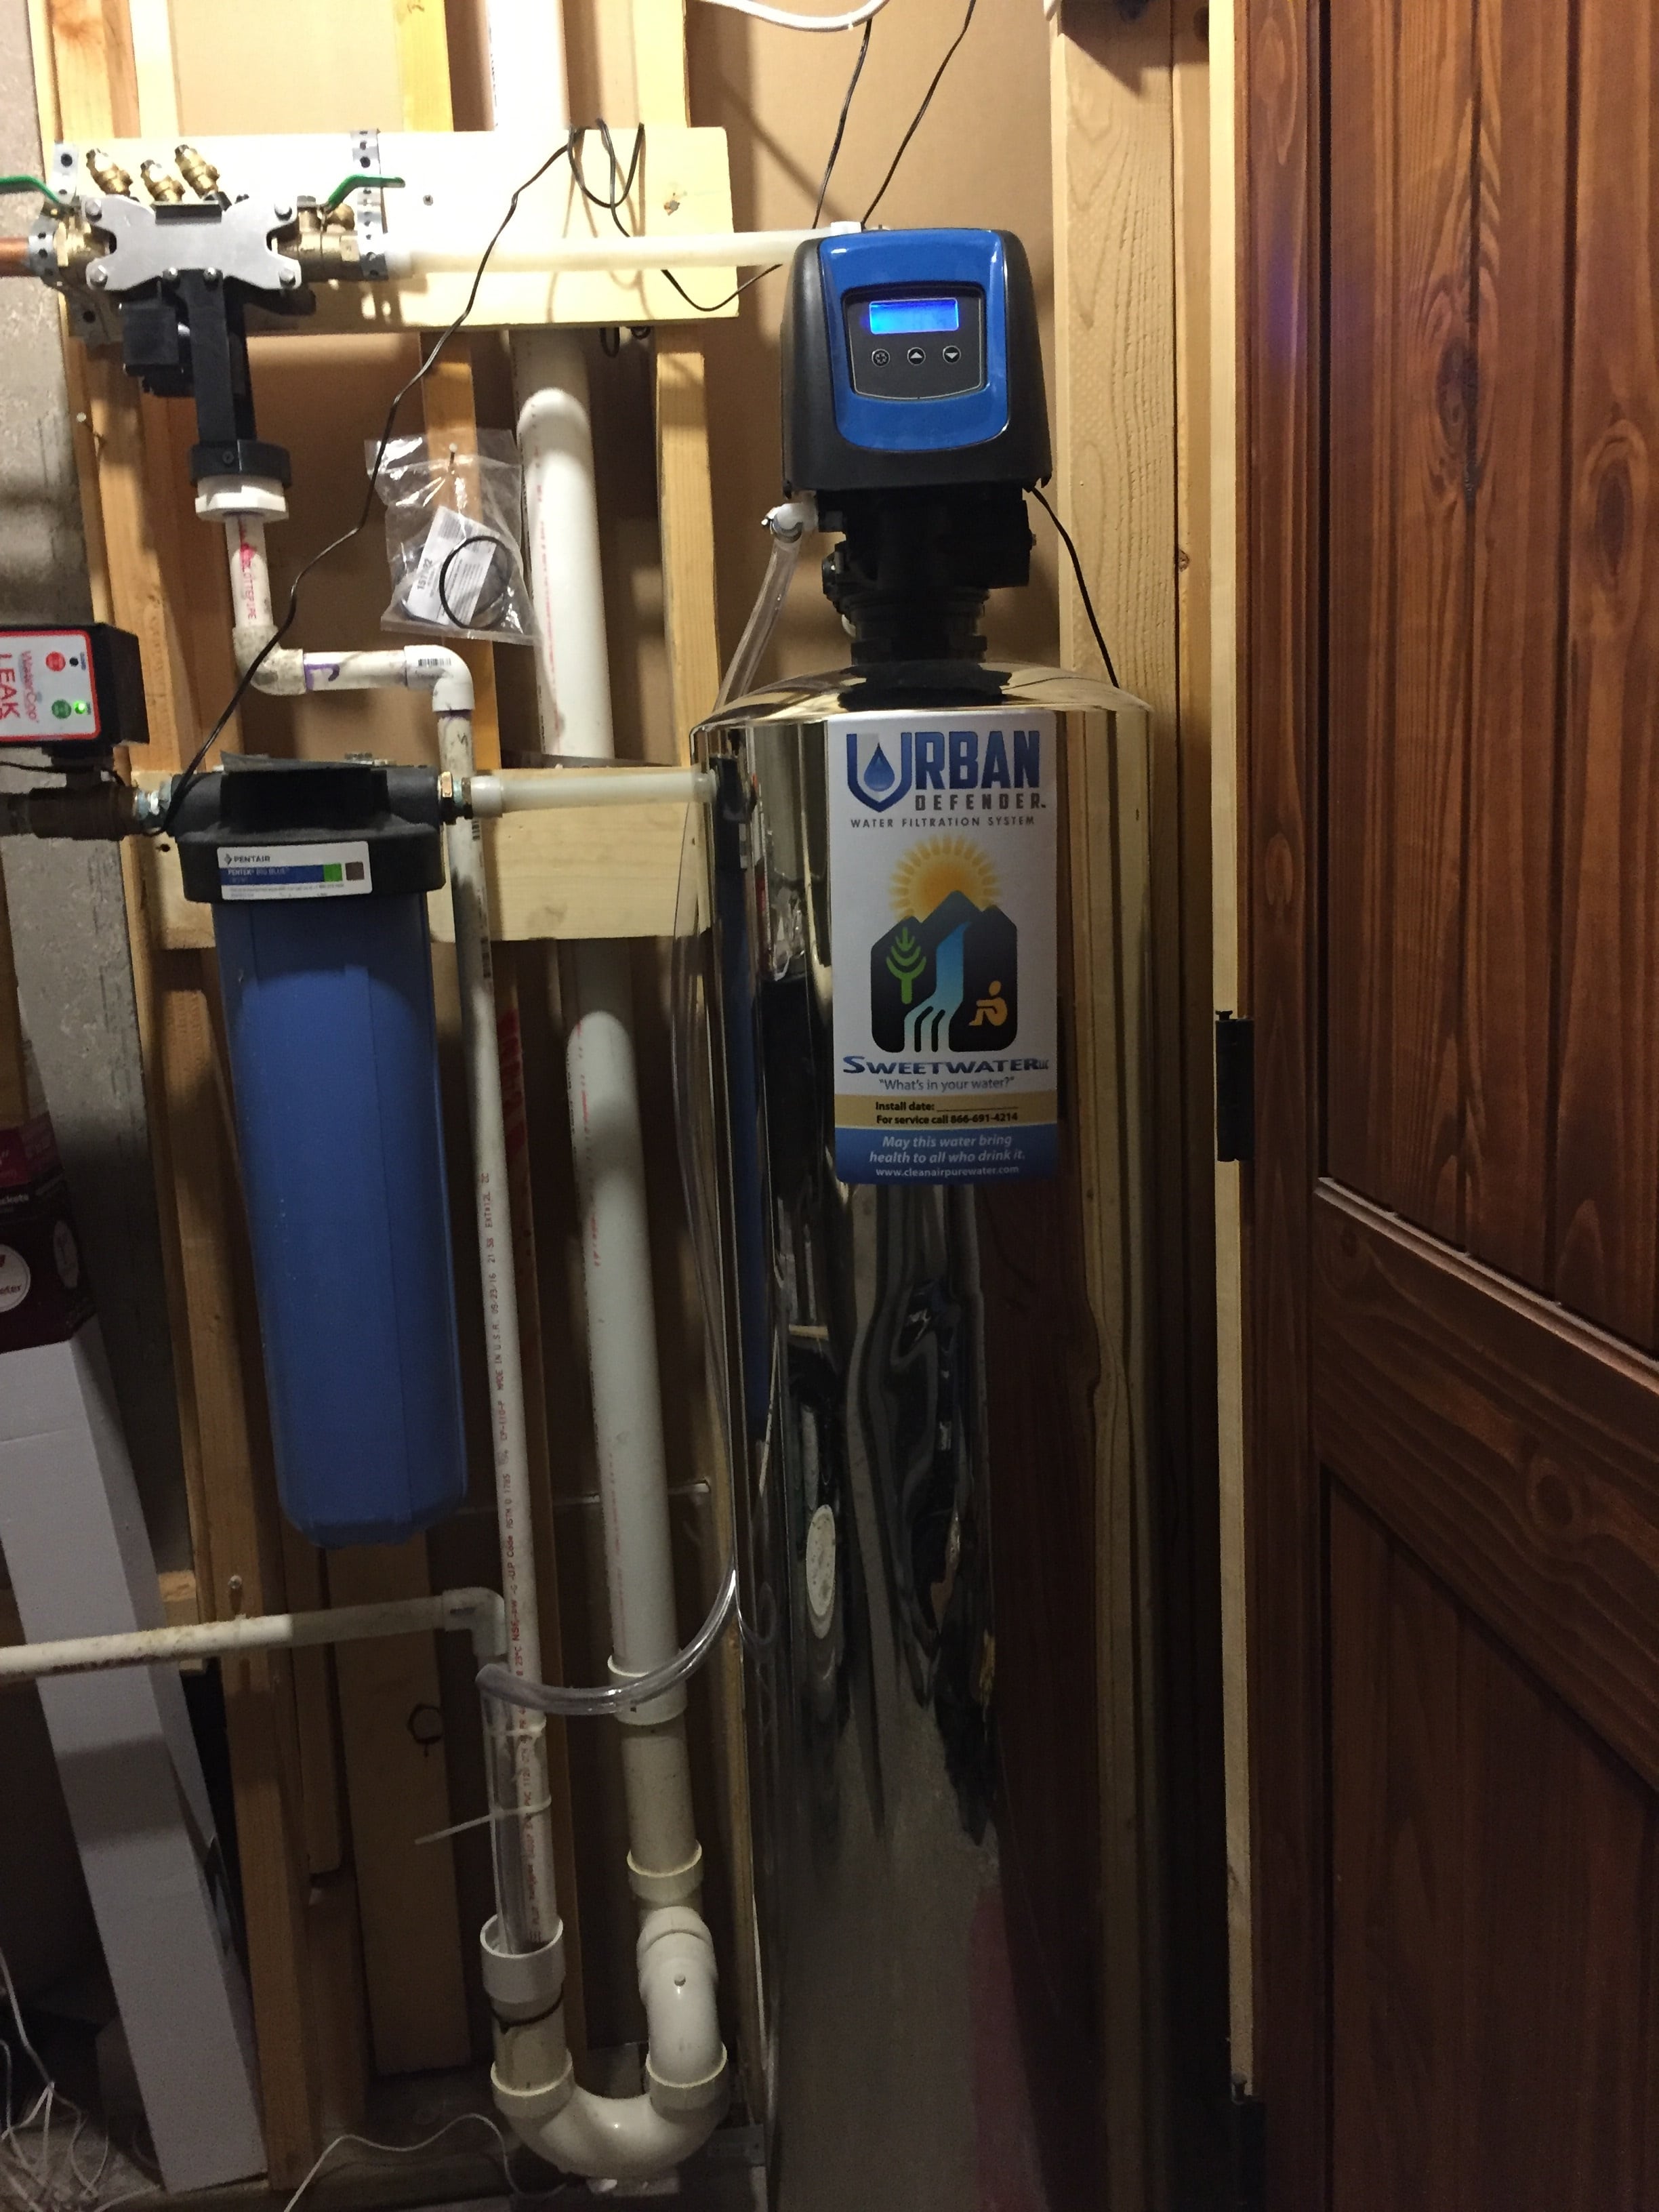 Sweetwater's Urban Defender whole house water filter